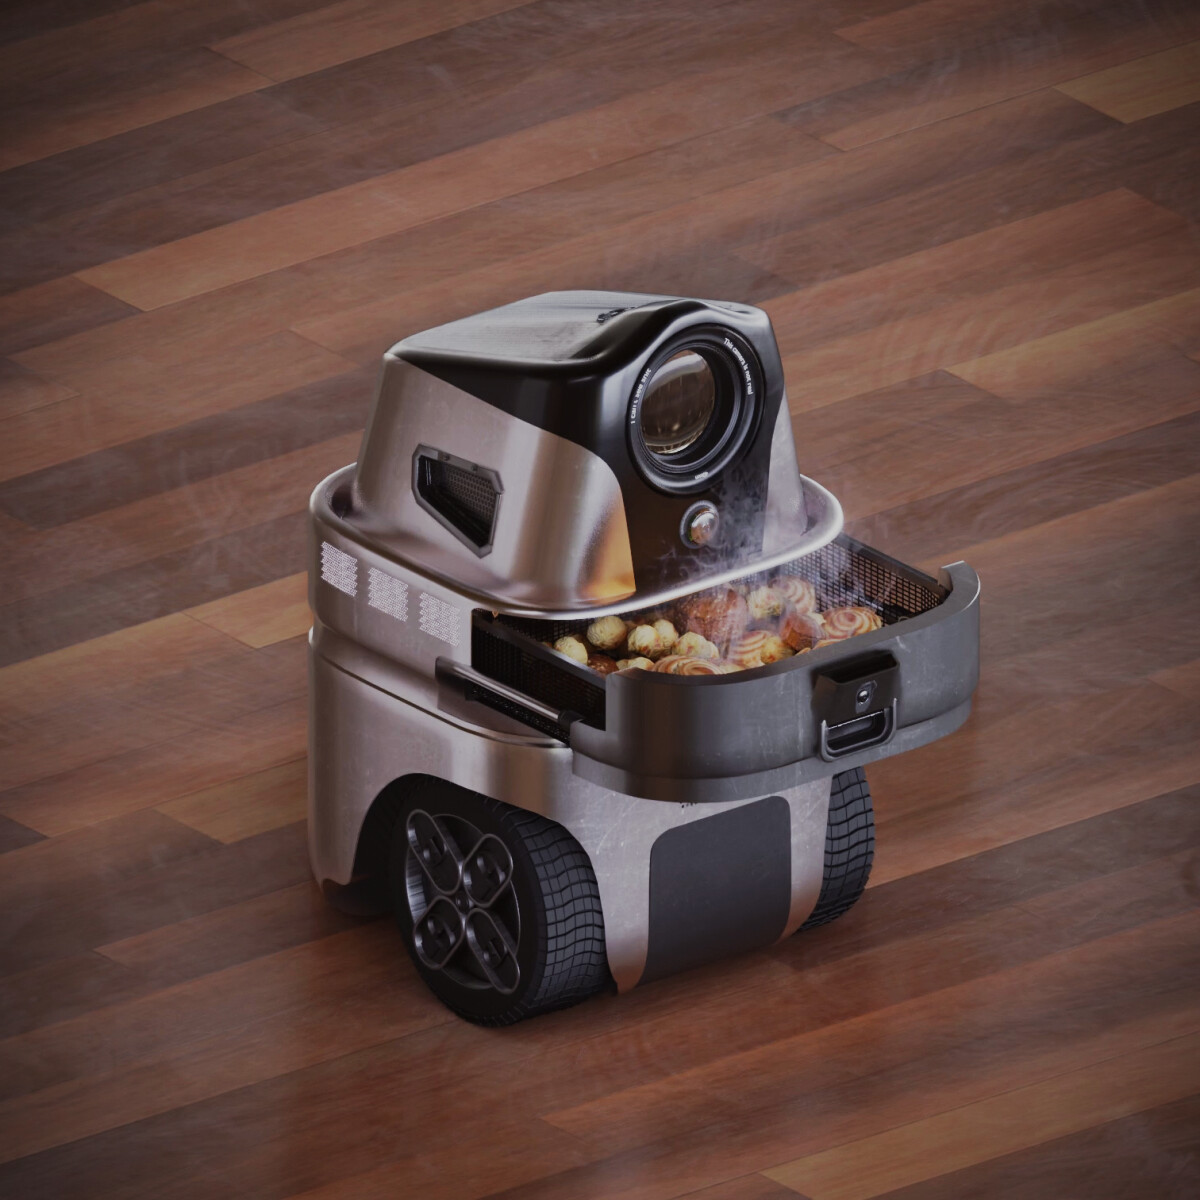 Airfryer from the future